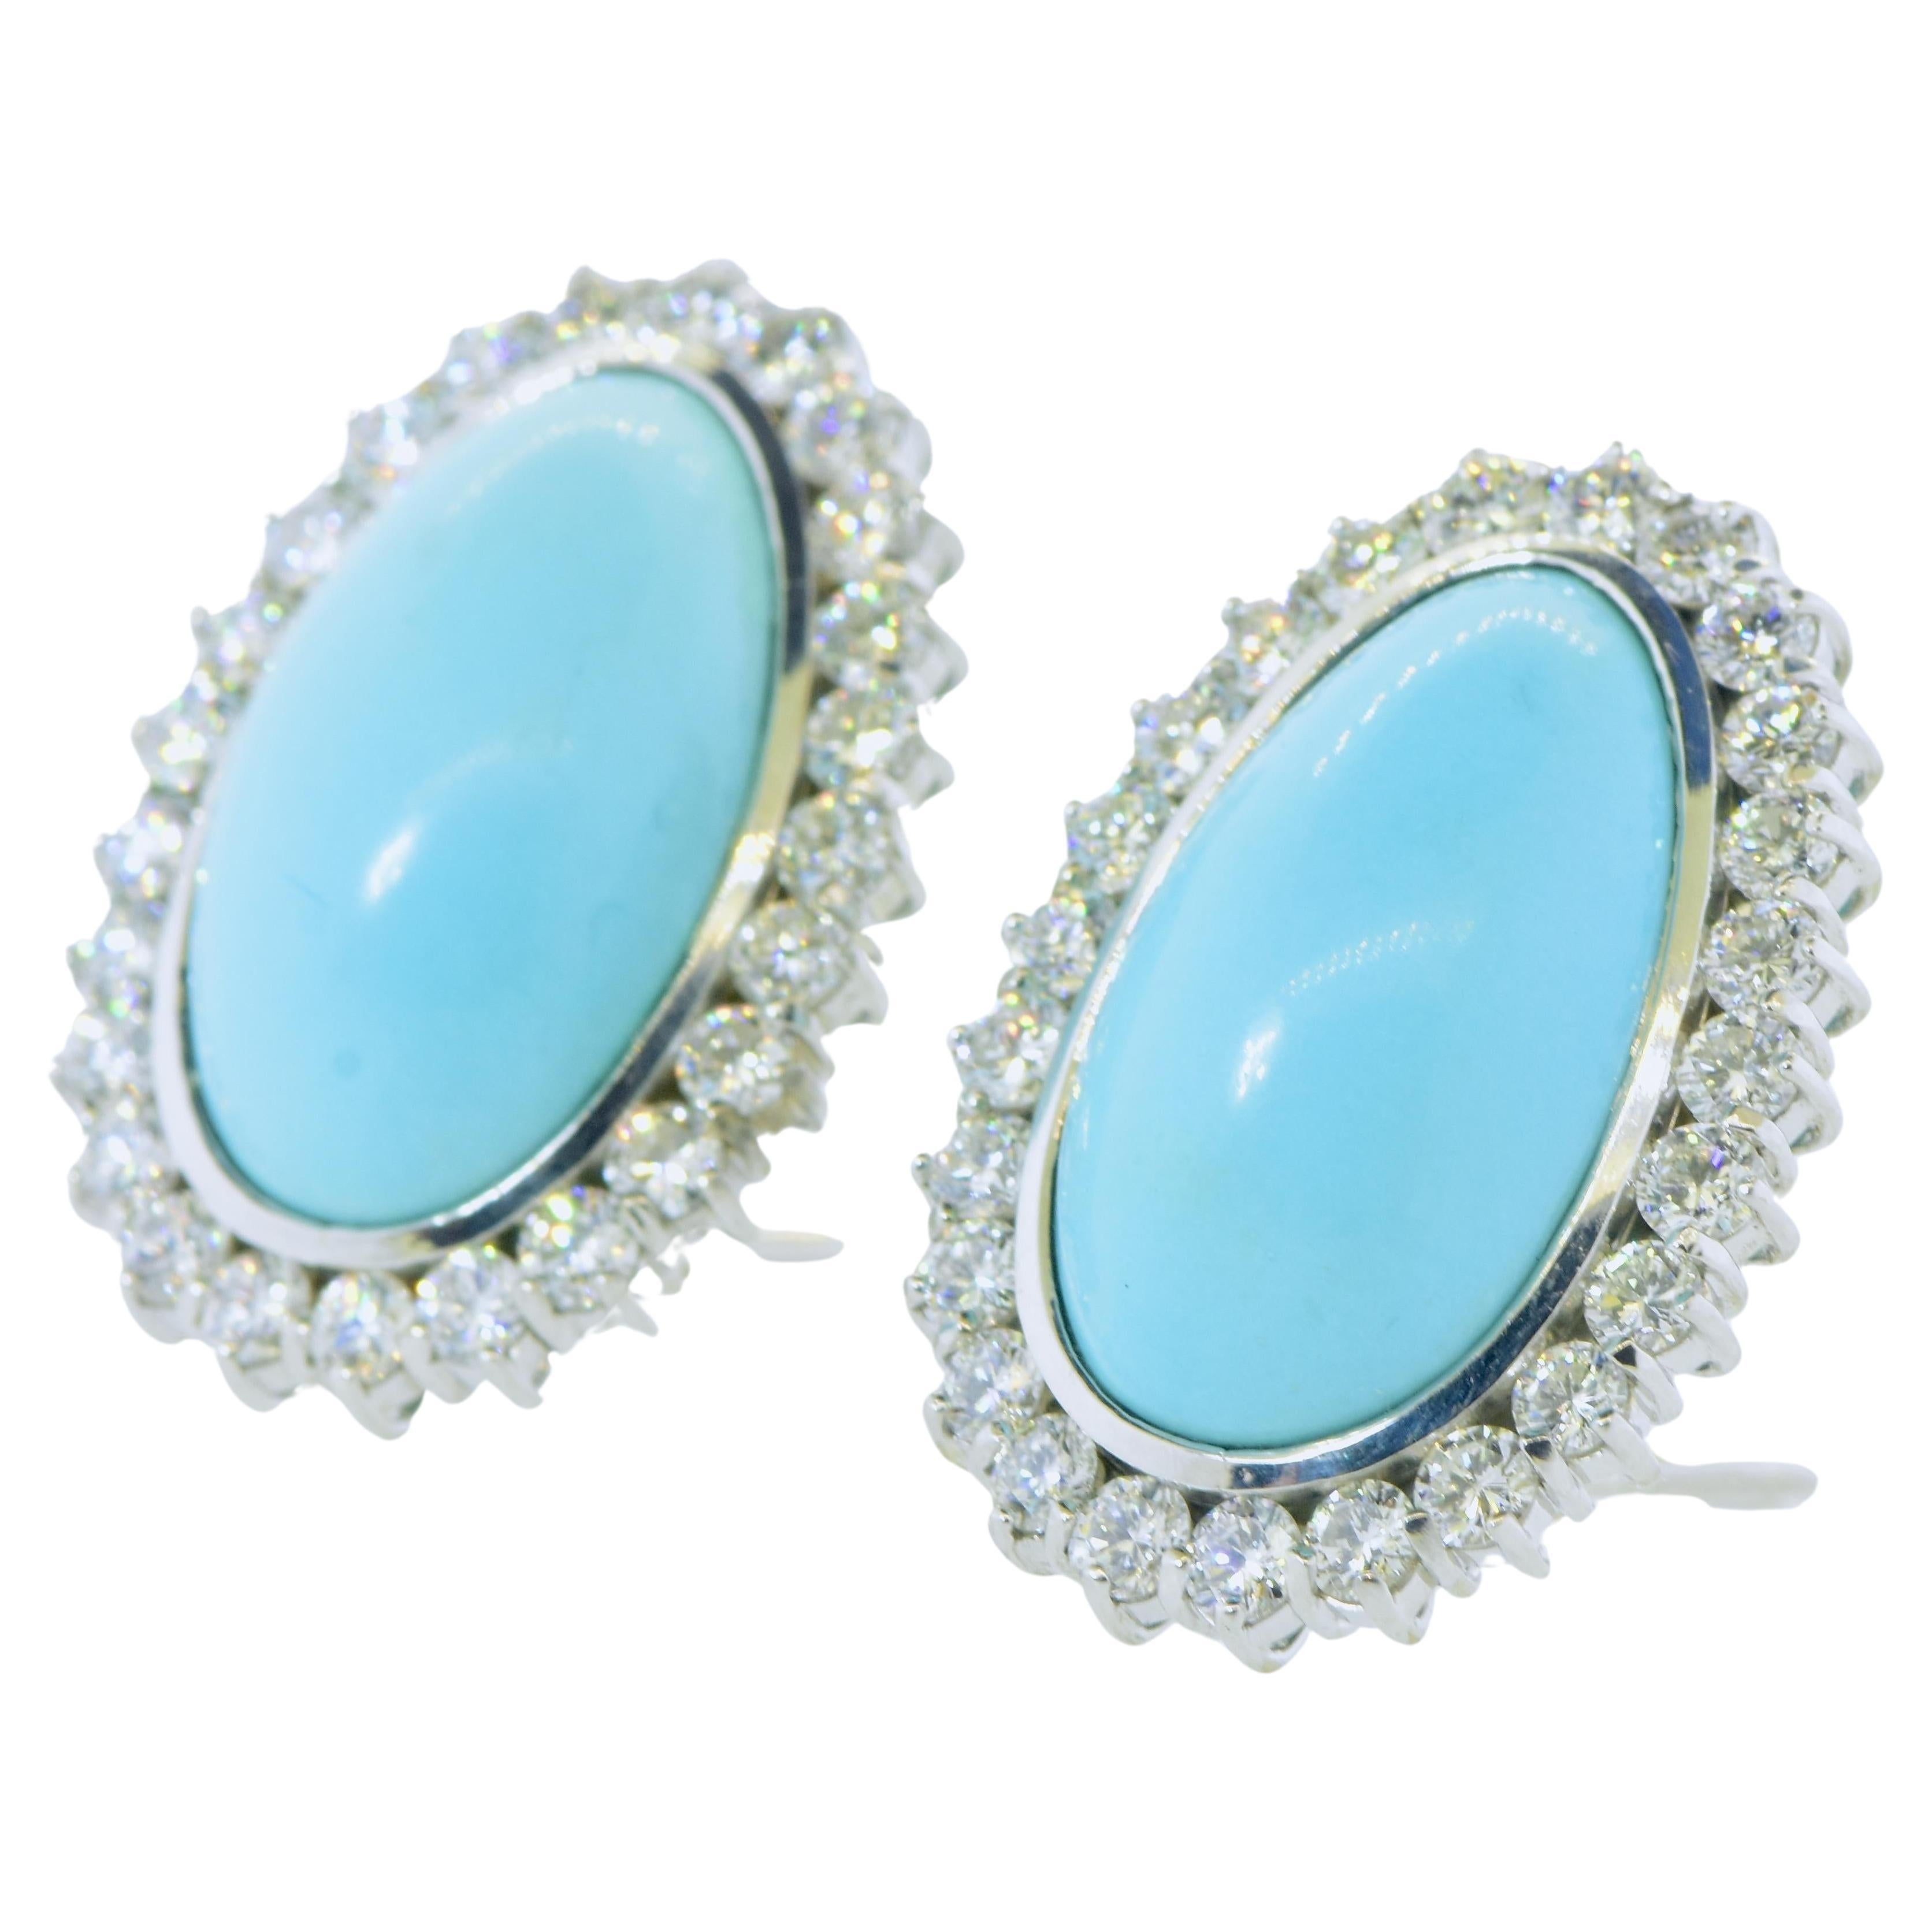 Large and Important Fine Turquoise & Diamond, 18K White Gold Earrings, c. 1990 For Sale